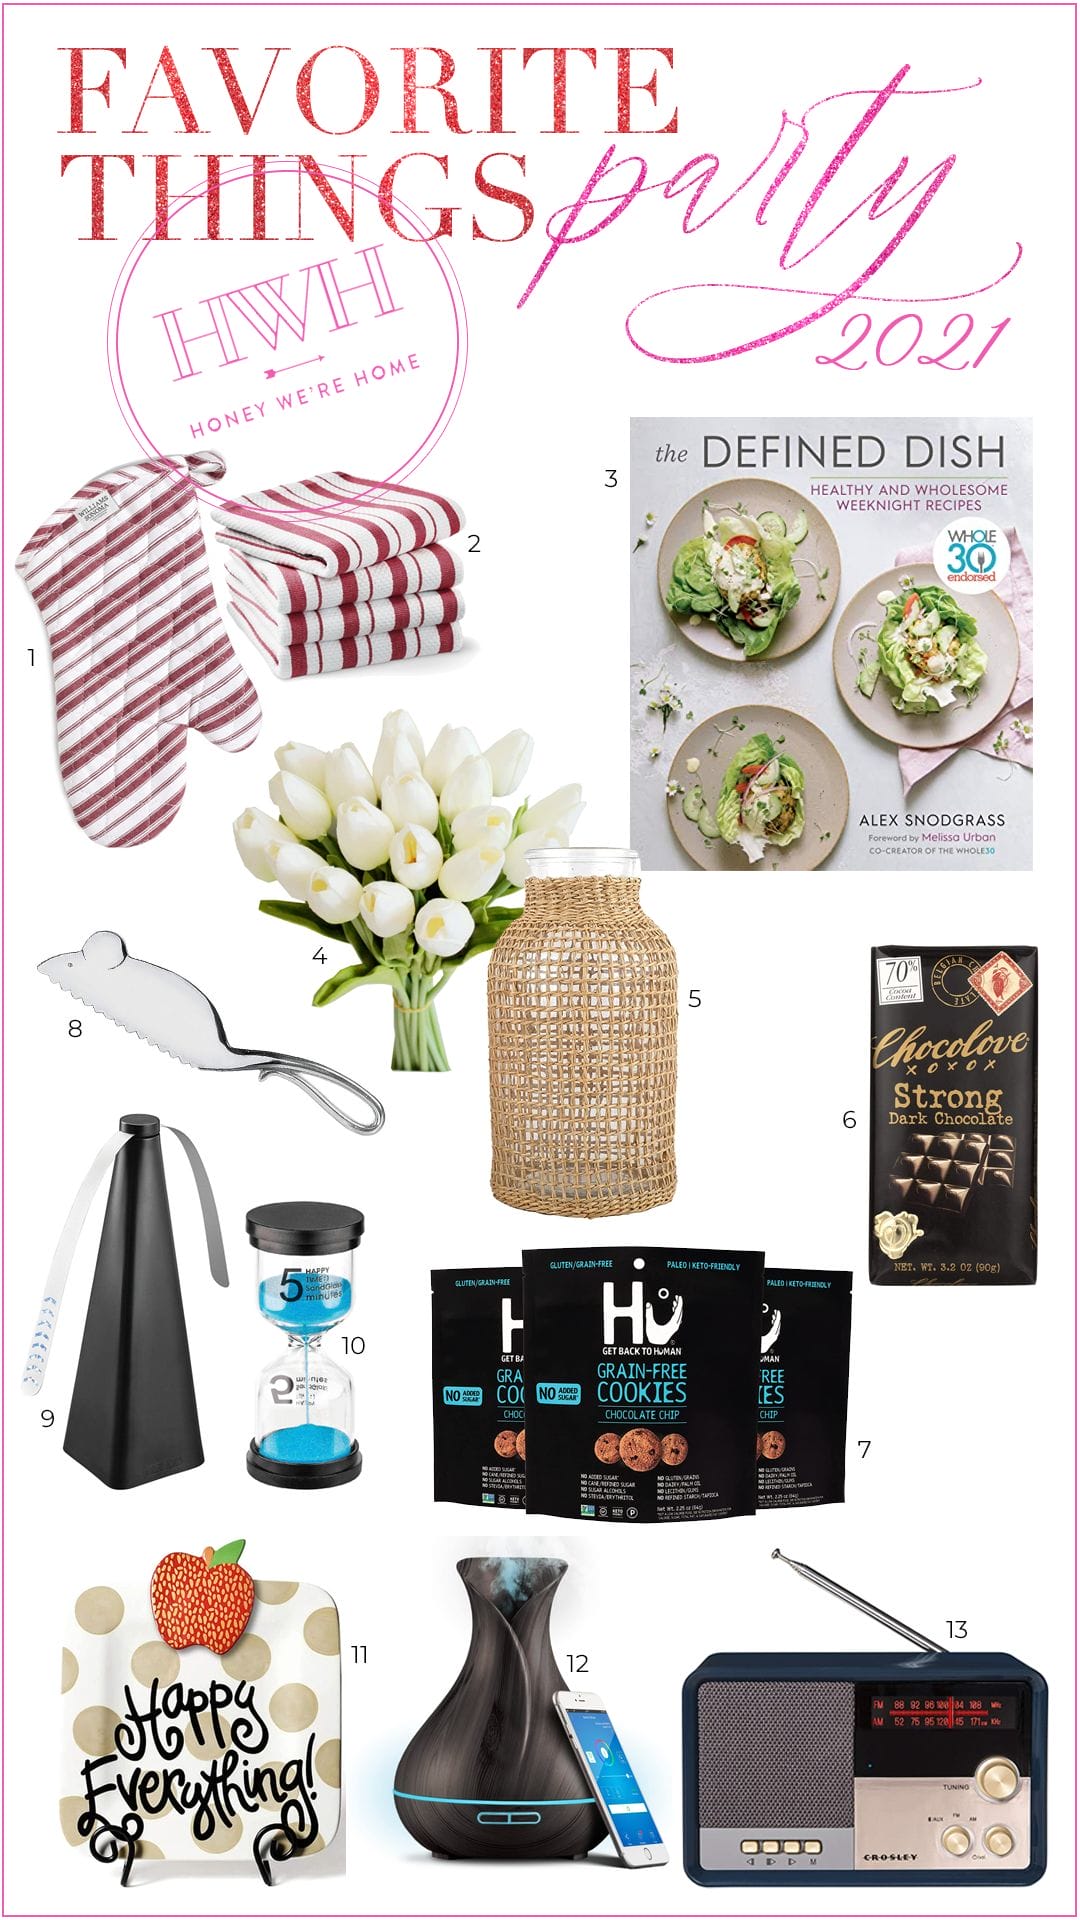 Favorite things party gift ideas - graciously saved